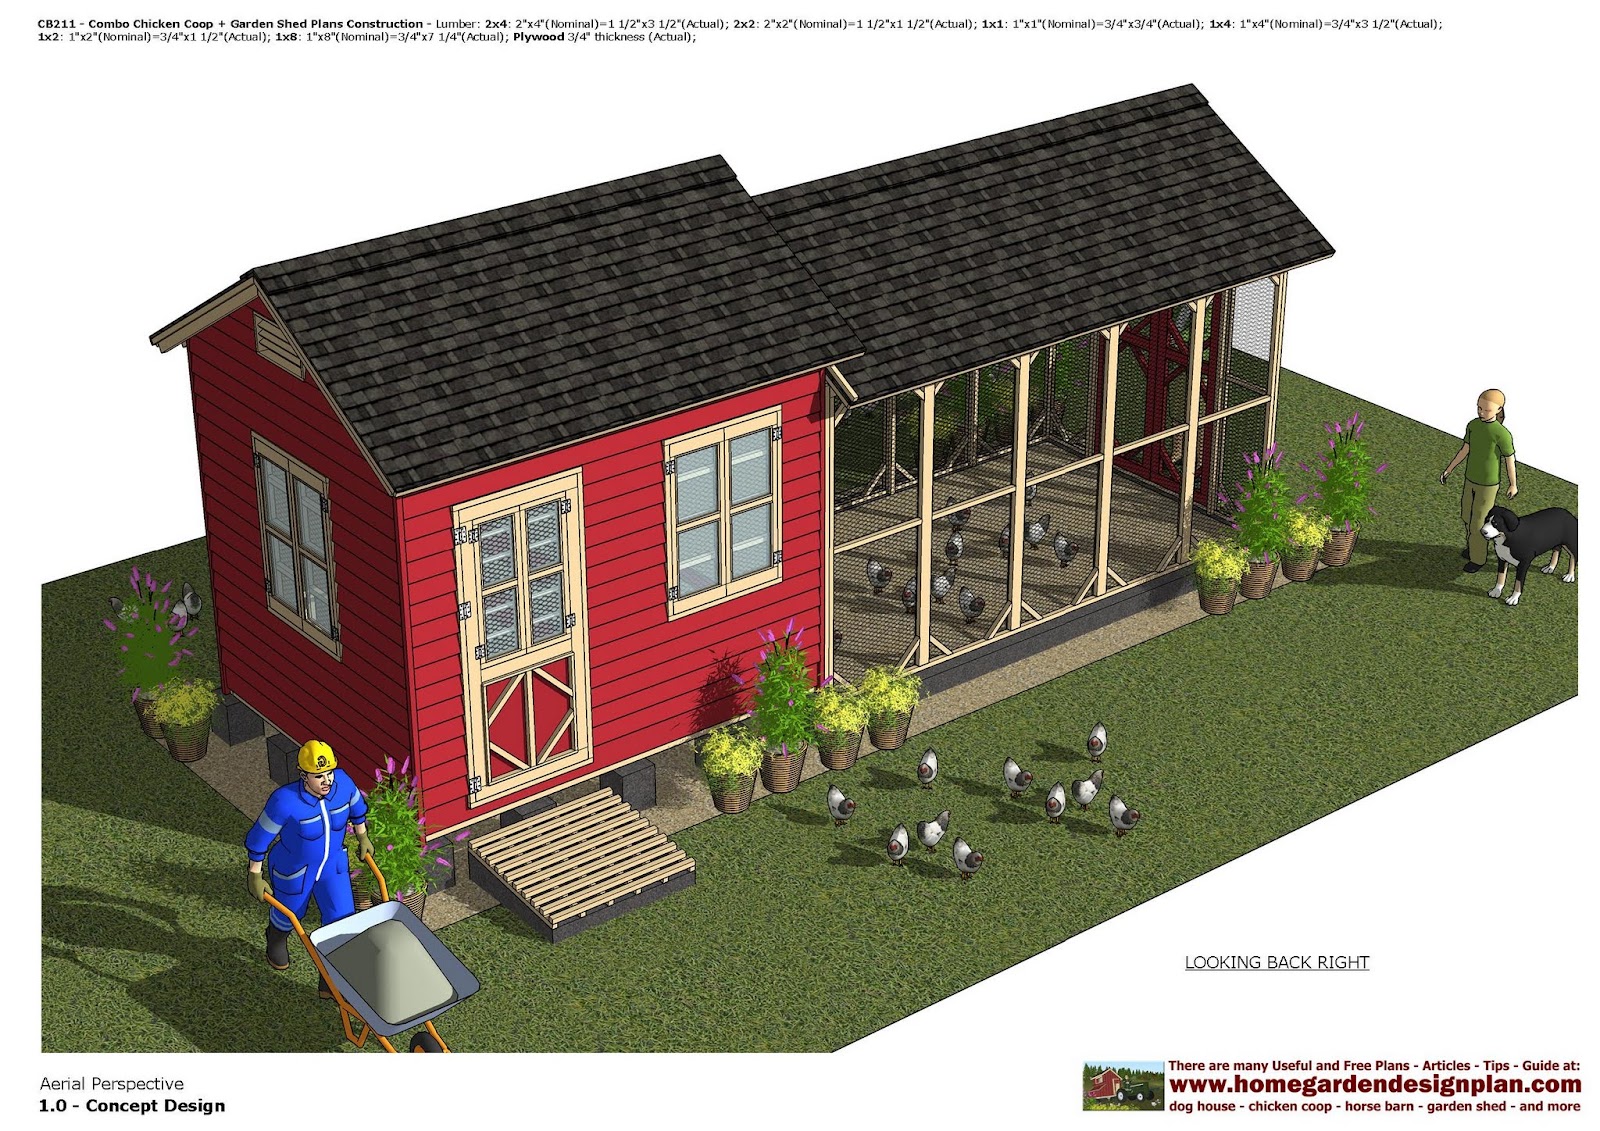 home garden plans: CB211 _ Combo Chicken Coop + Garden Shed Plans 